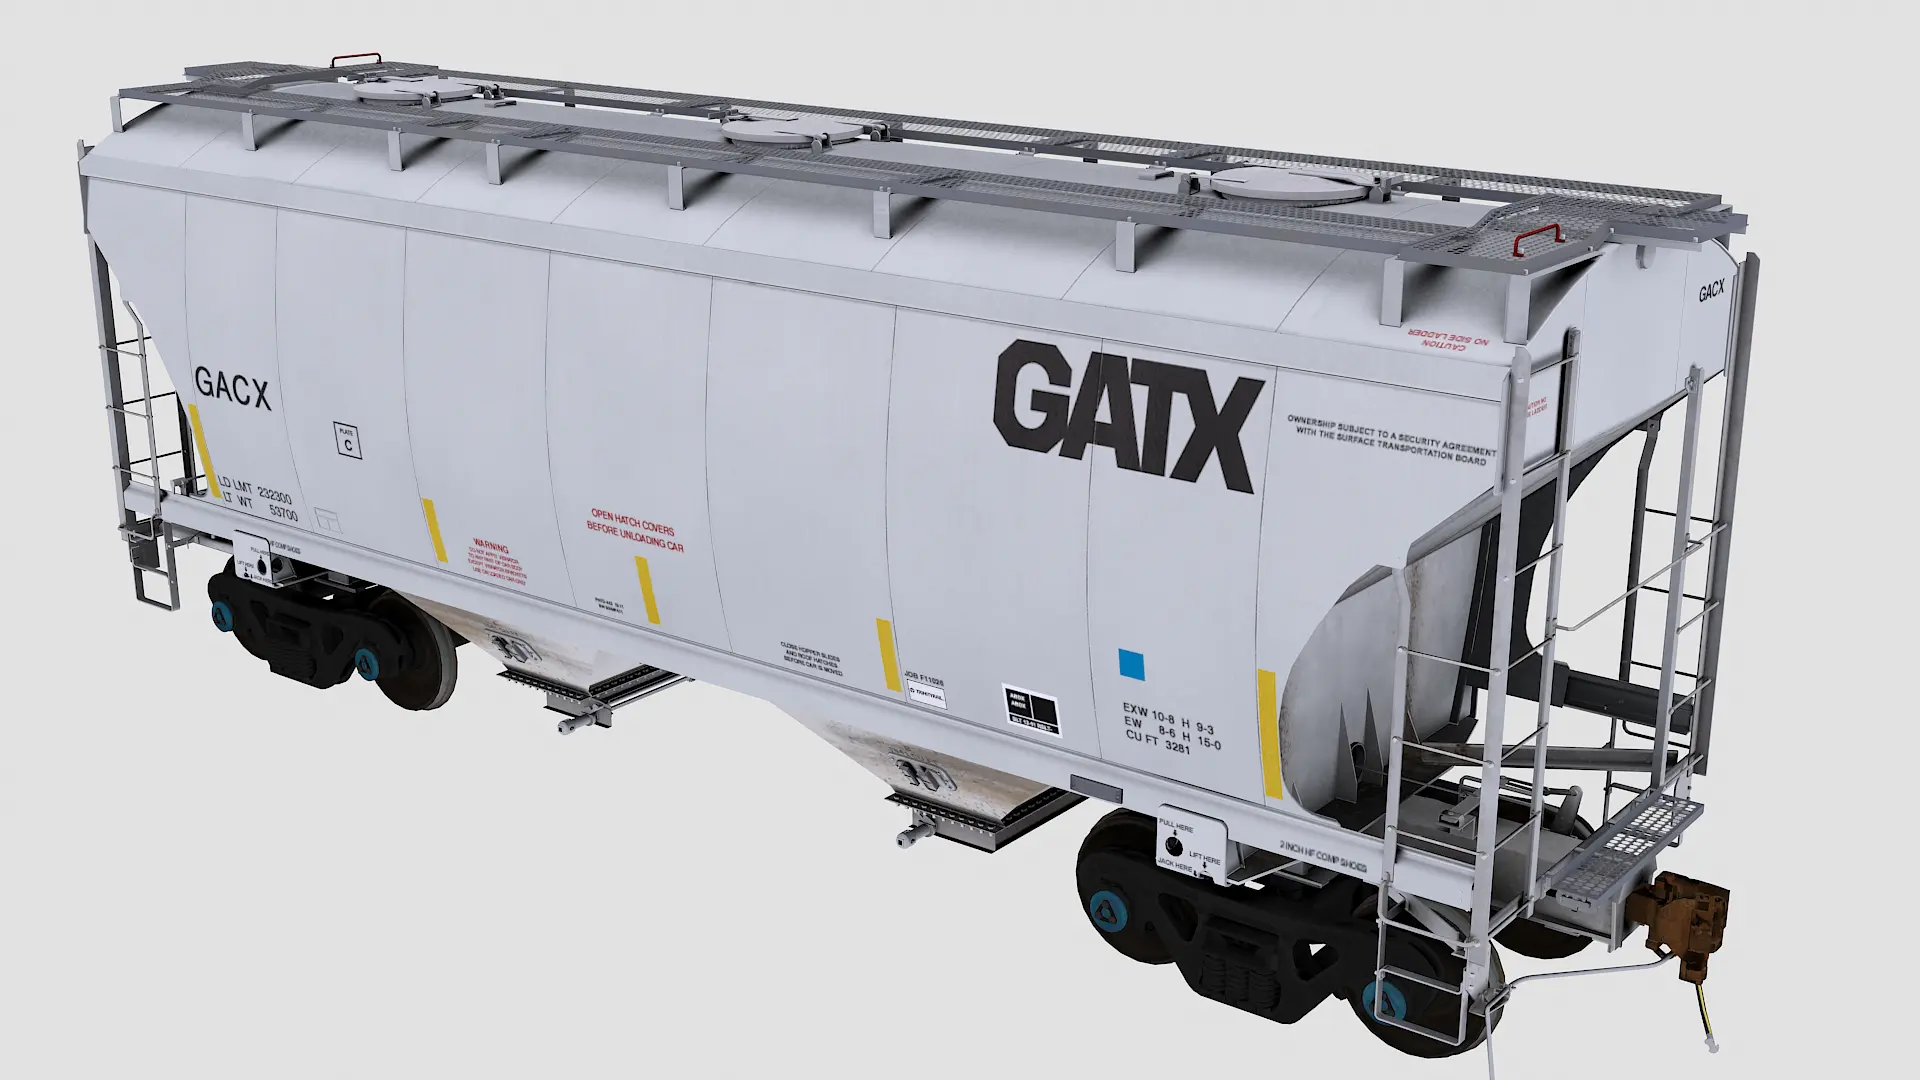 Gacx a two bay covered hopper